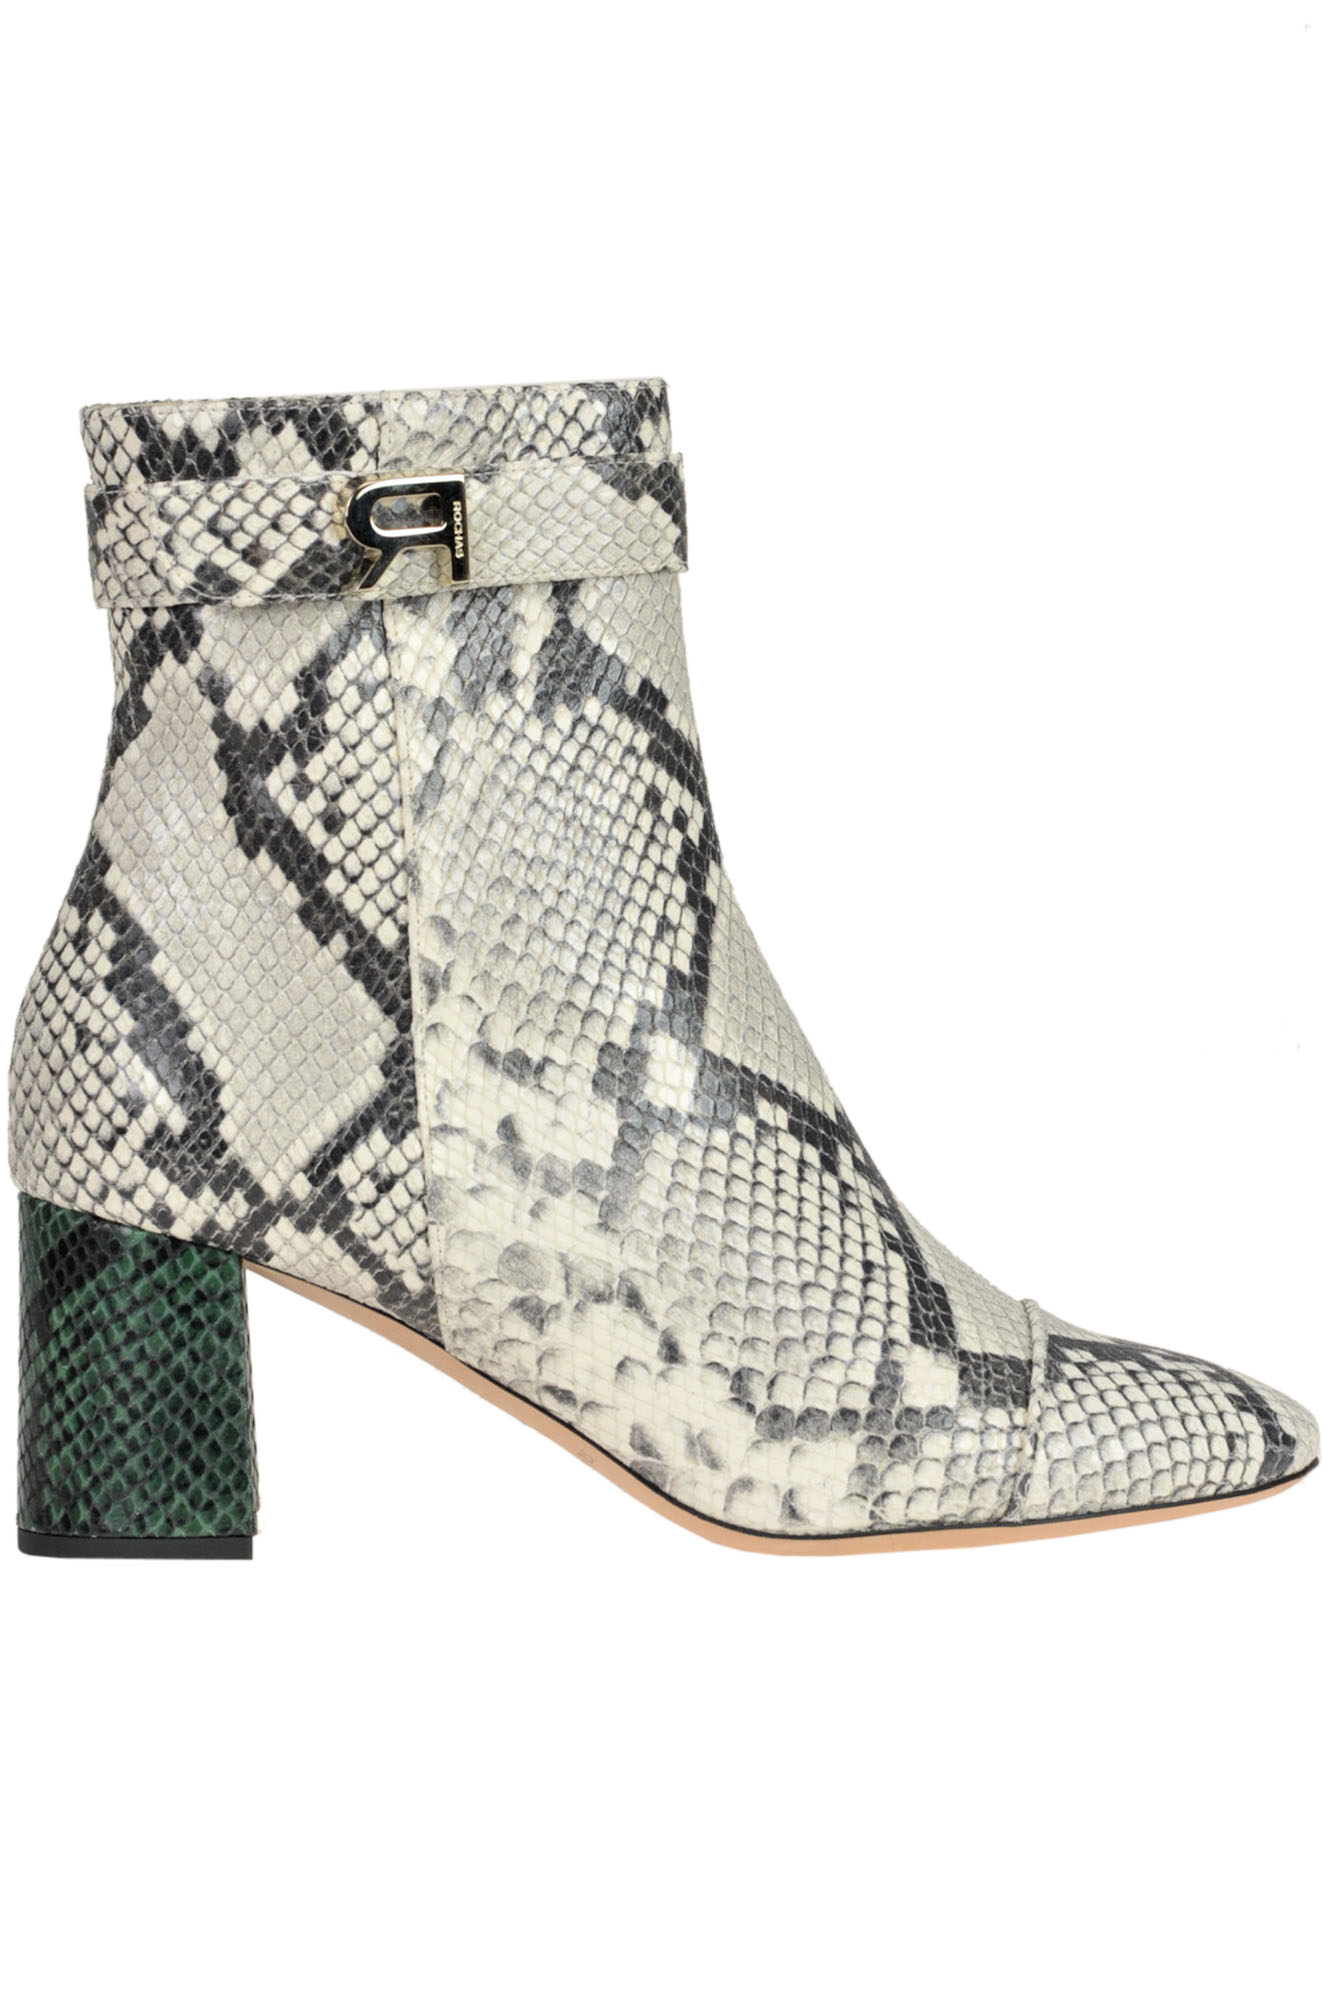 Rochas Reptile Prit Leather Ankle Botts In Cream